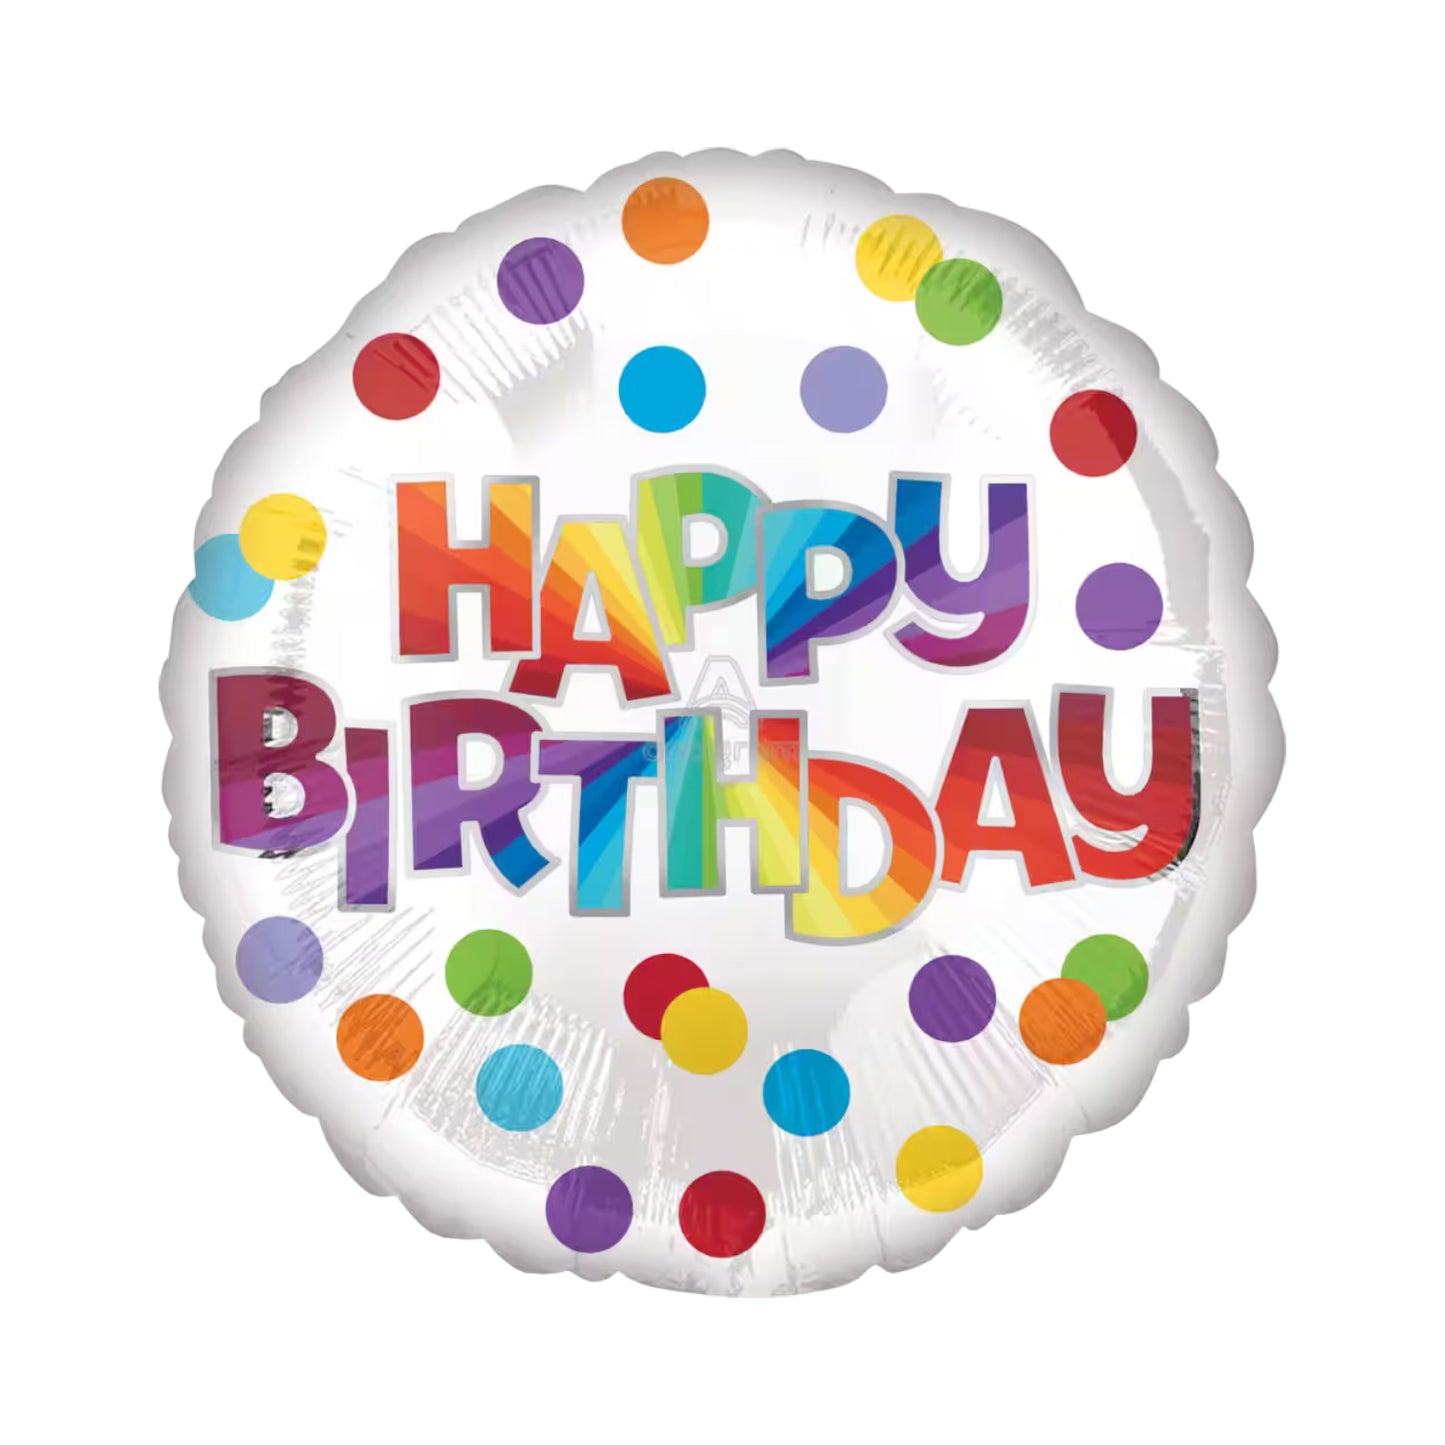 Happy Birthday Balloon - White BG with Colourful Letters and Dots.